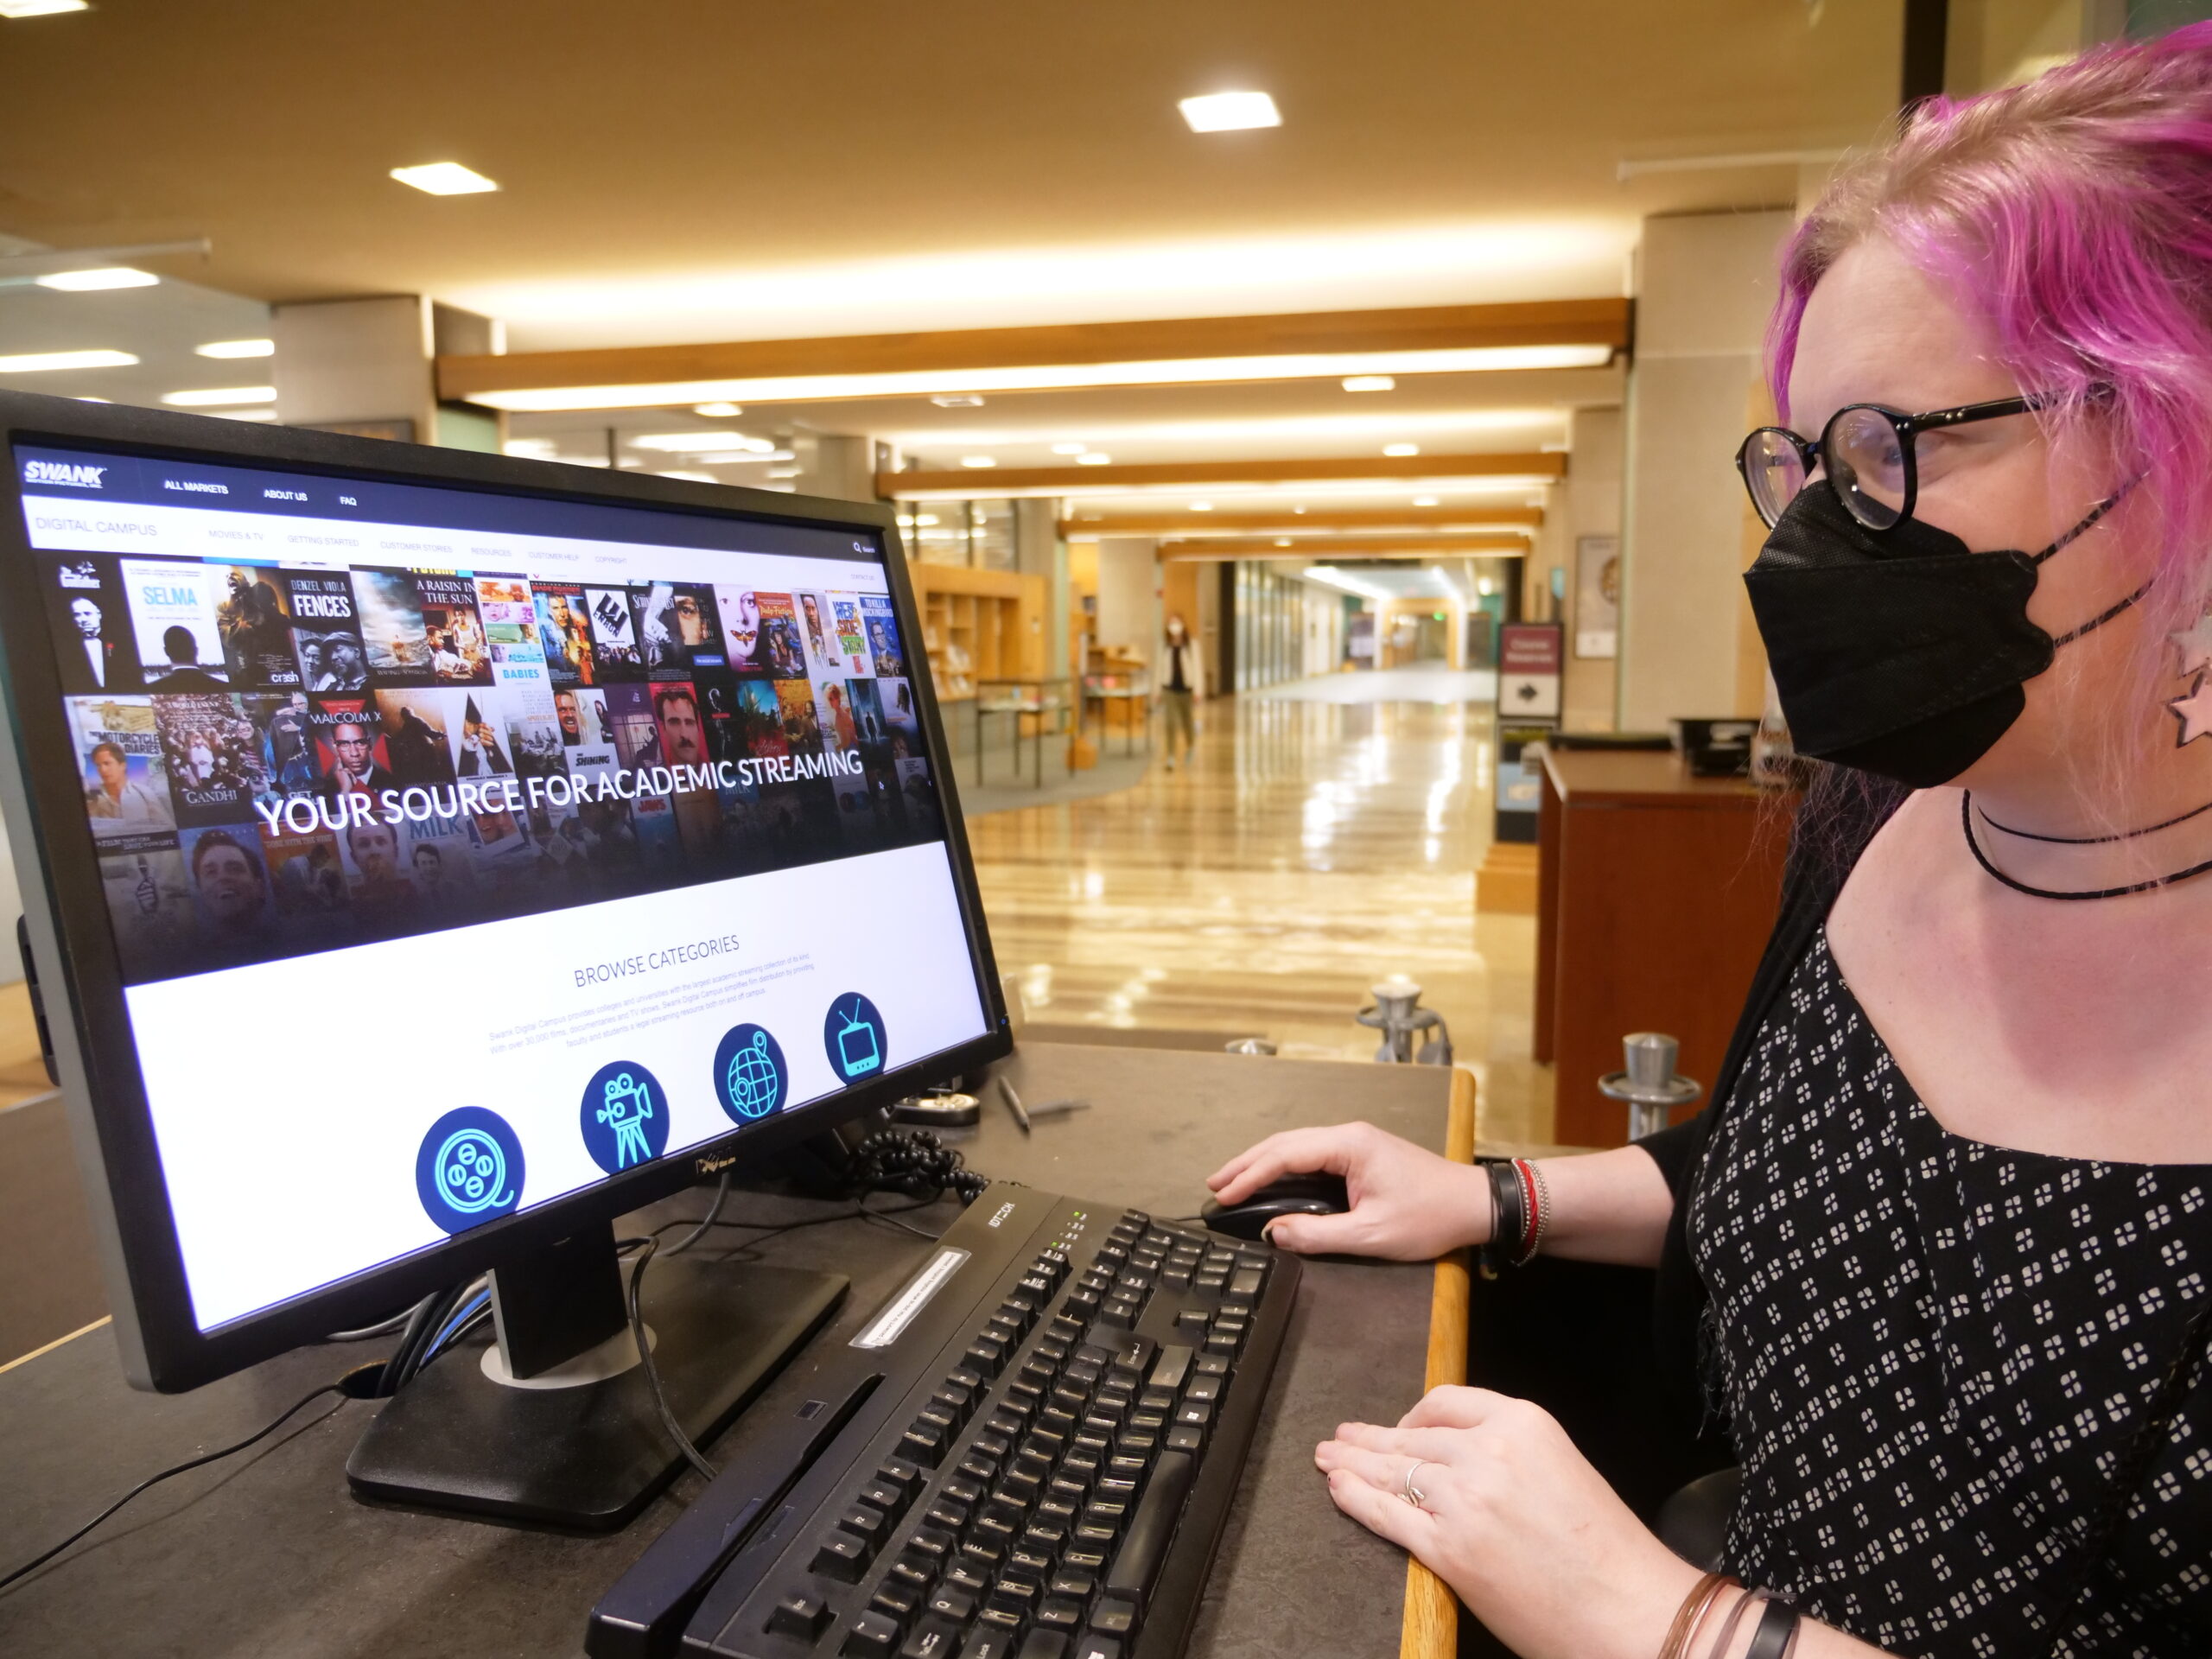 Jessa Eris, course reserves systems and technology coordinator, demonstrates how to access streaming videos on Swank Digital Campus, one of several databases available through Cornell University Library.